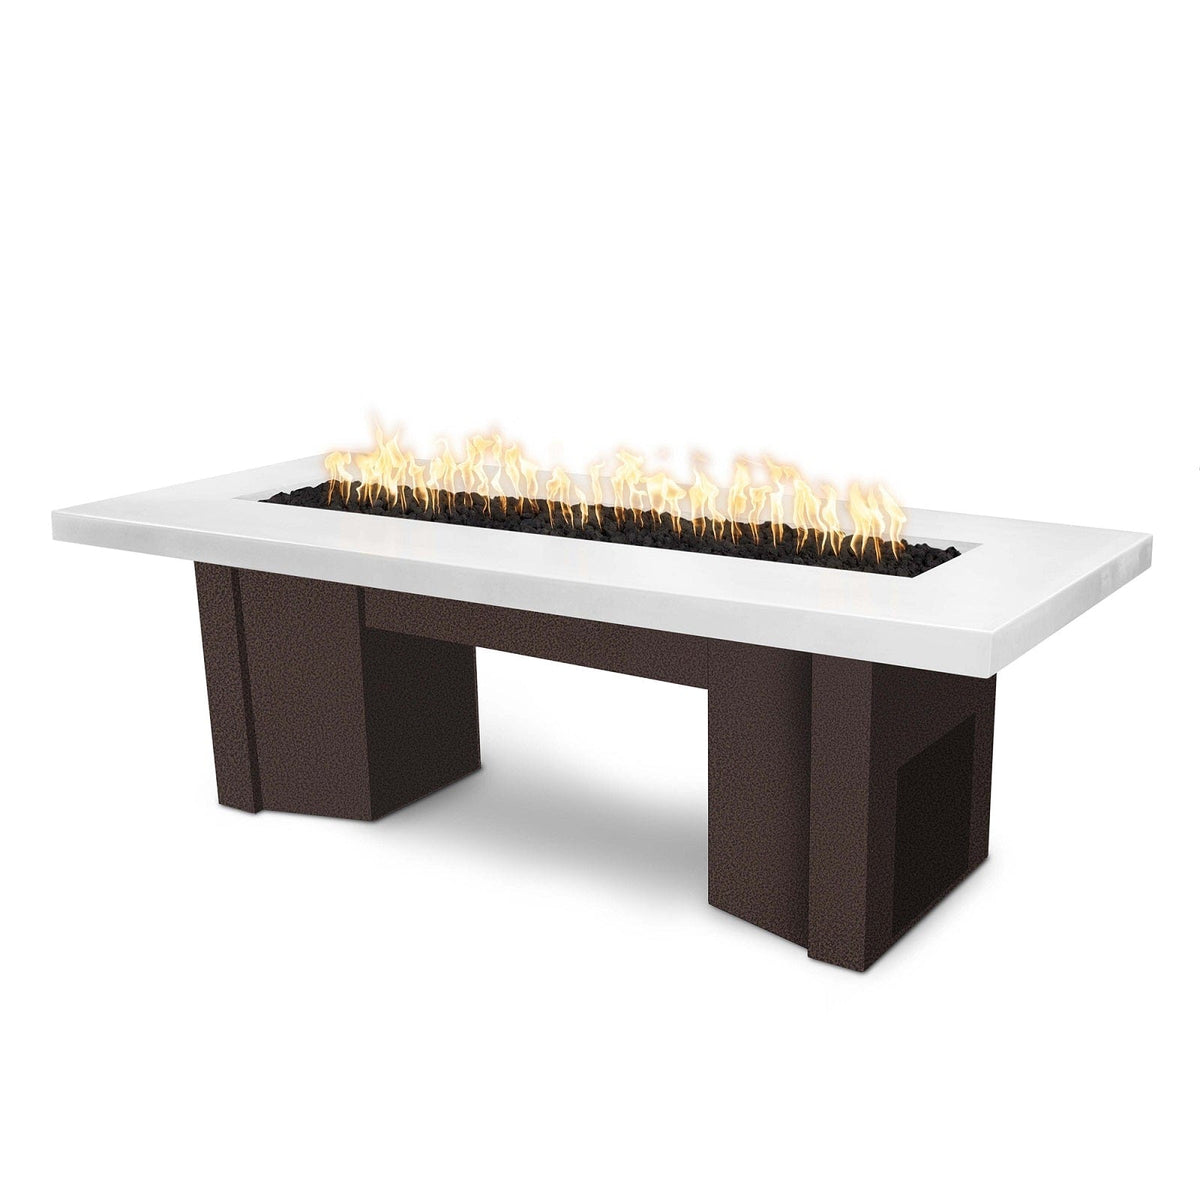 The Outdoor Plus Fire Features Limestone (-LIM) / Copper Vein Powder Coated Steel (-CPV) The Outdoor Plus 60&quot; Alameda Fire Table Smooth Concrete in Liquid Propane - Match Lit with Flame Sense System / OPT-ALMGFRC60FSML-LP